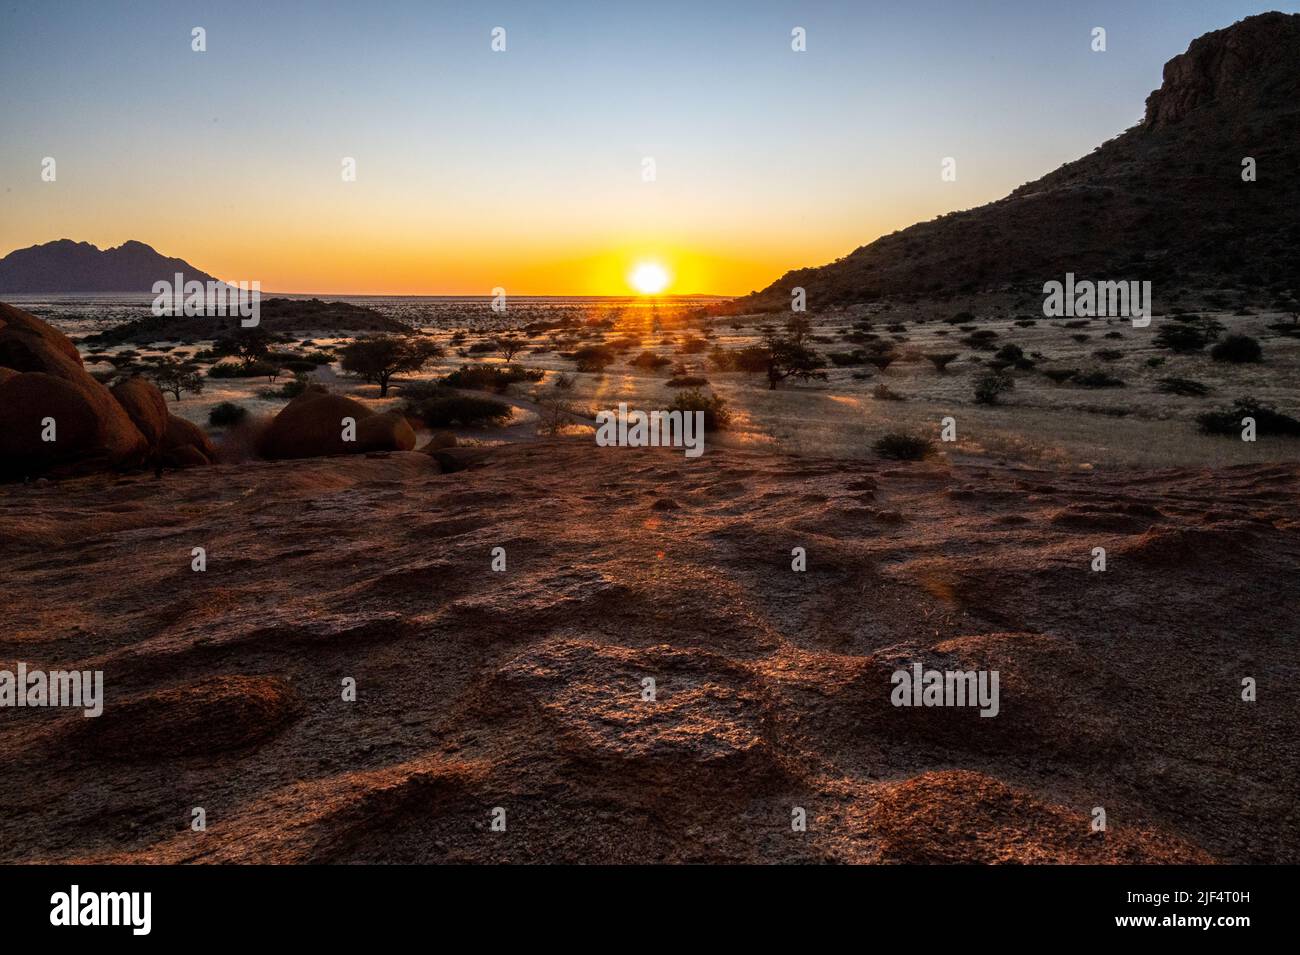 Impression of the Rocky Namibian Desert near Spitzkoppe during the golden hour around sunset. Stock Photo